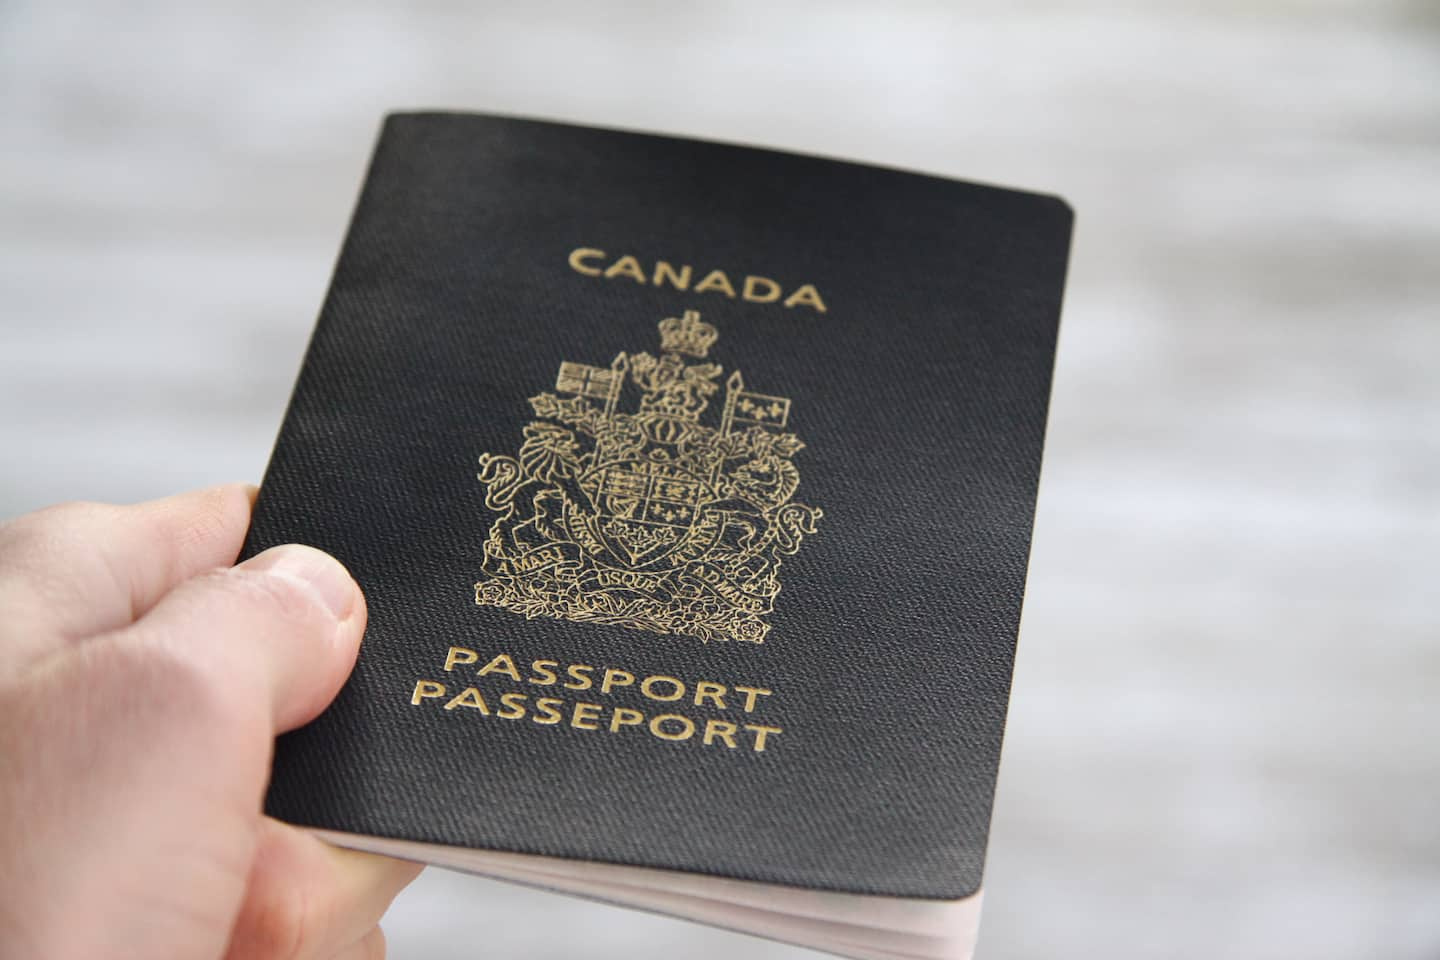 Passport Crisis: Transfer Requests at Service Canada Centers